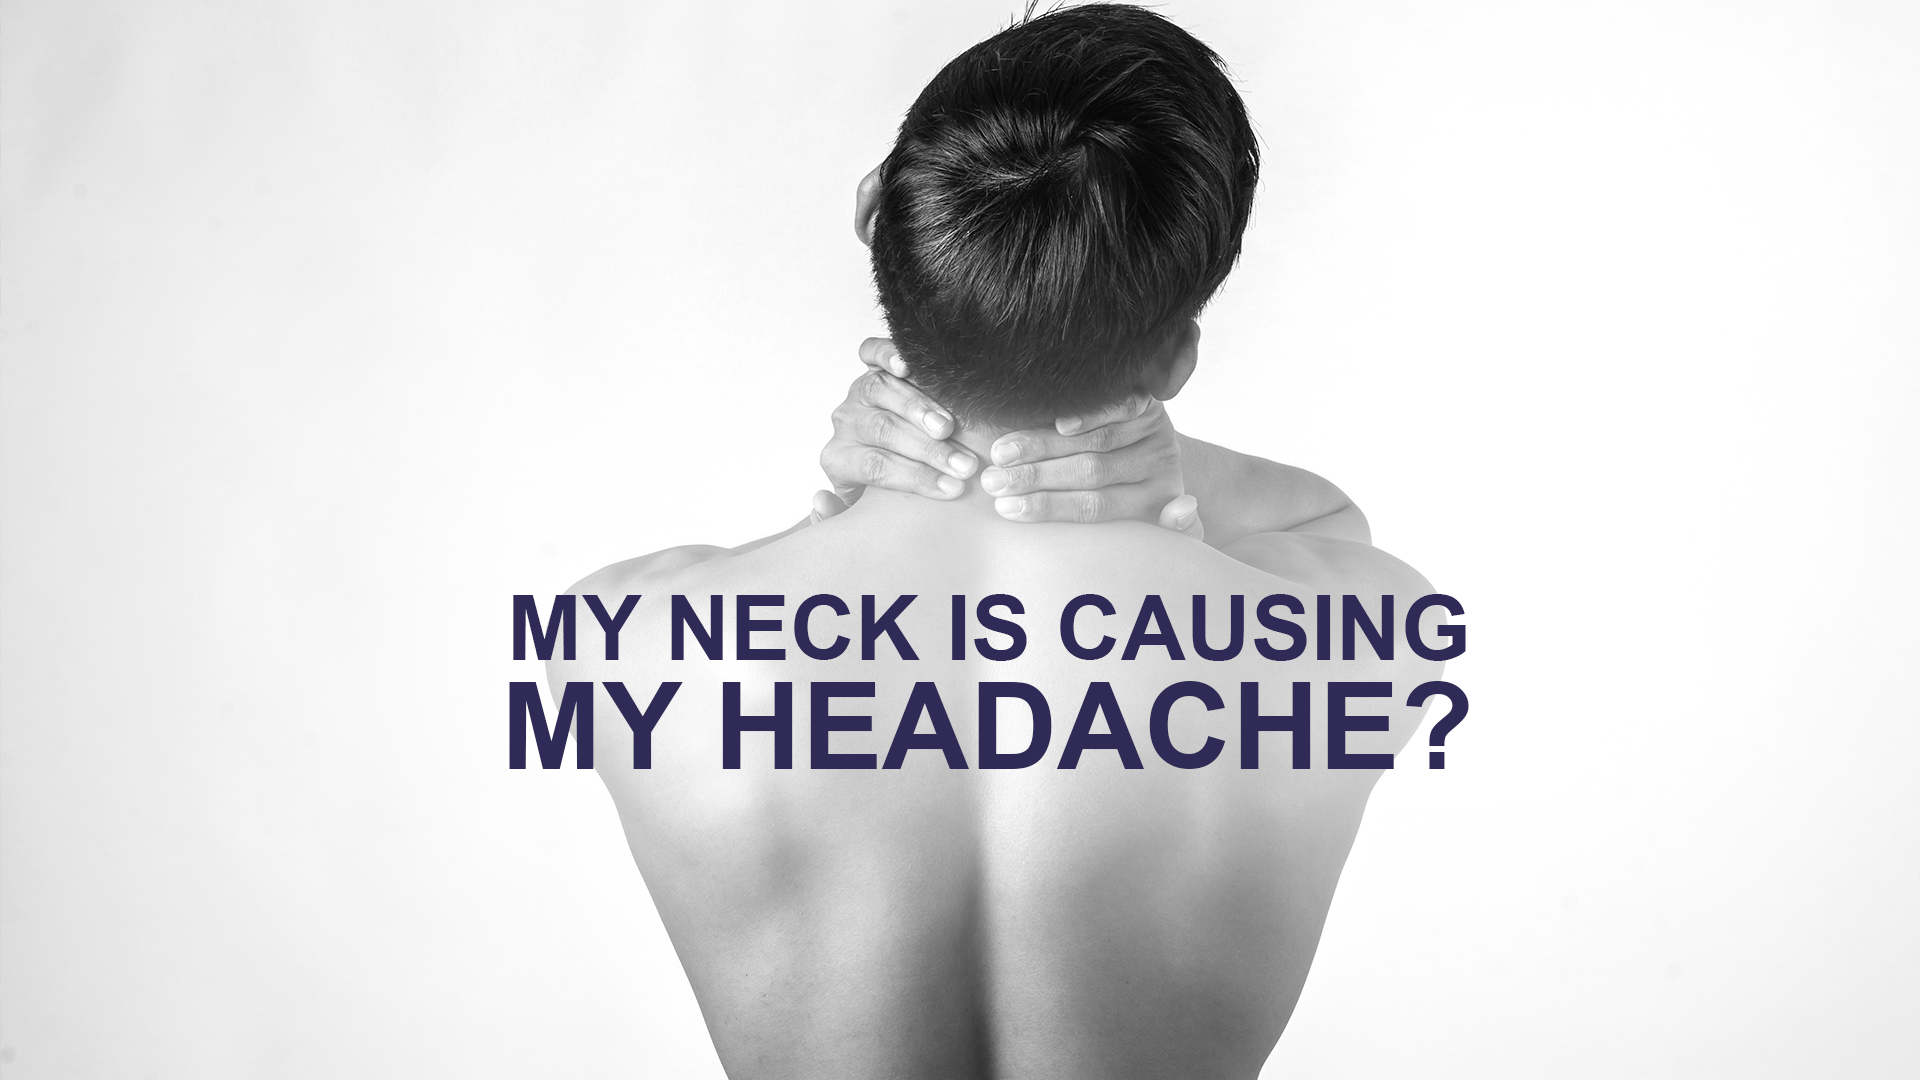 Headaches & Muscle Tension in Your Upper Shoulders & Neck?